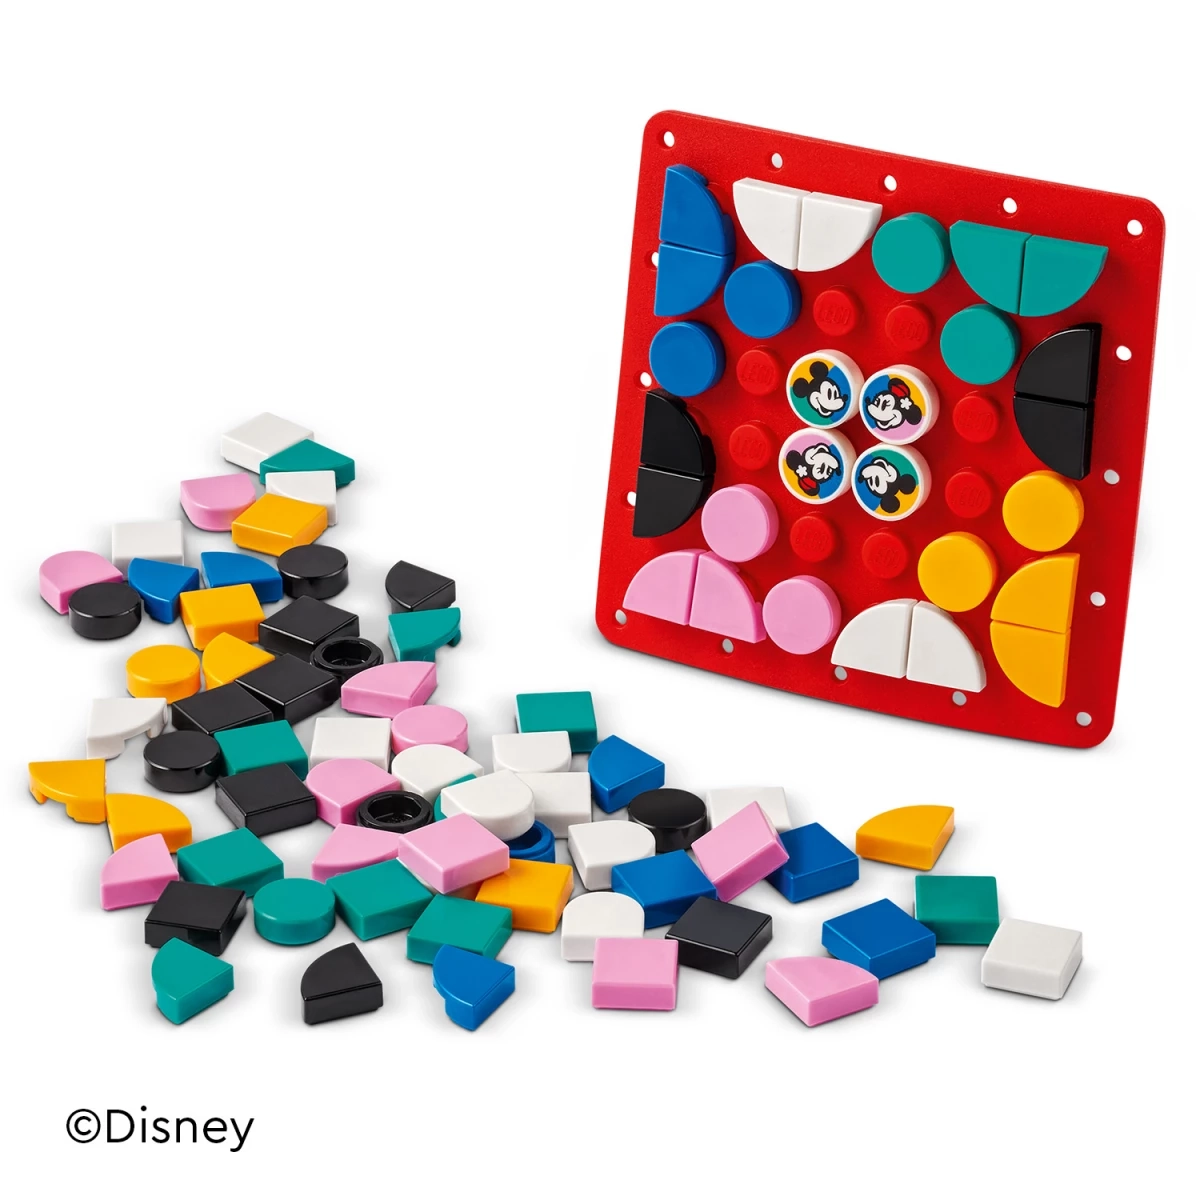 Lego Dots Disney Mickey Mouse & Minnie Mouse Stitch-On Patch 41963 Kit (95 Pieces)